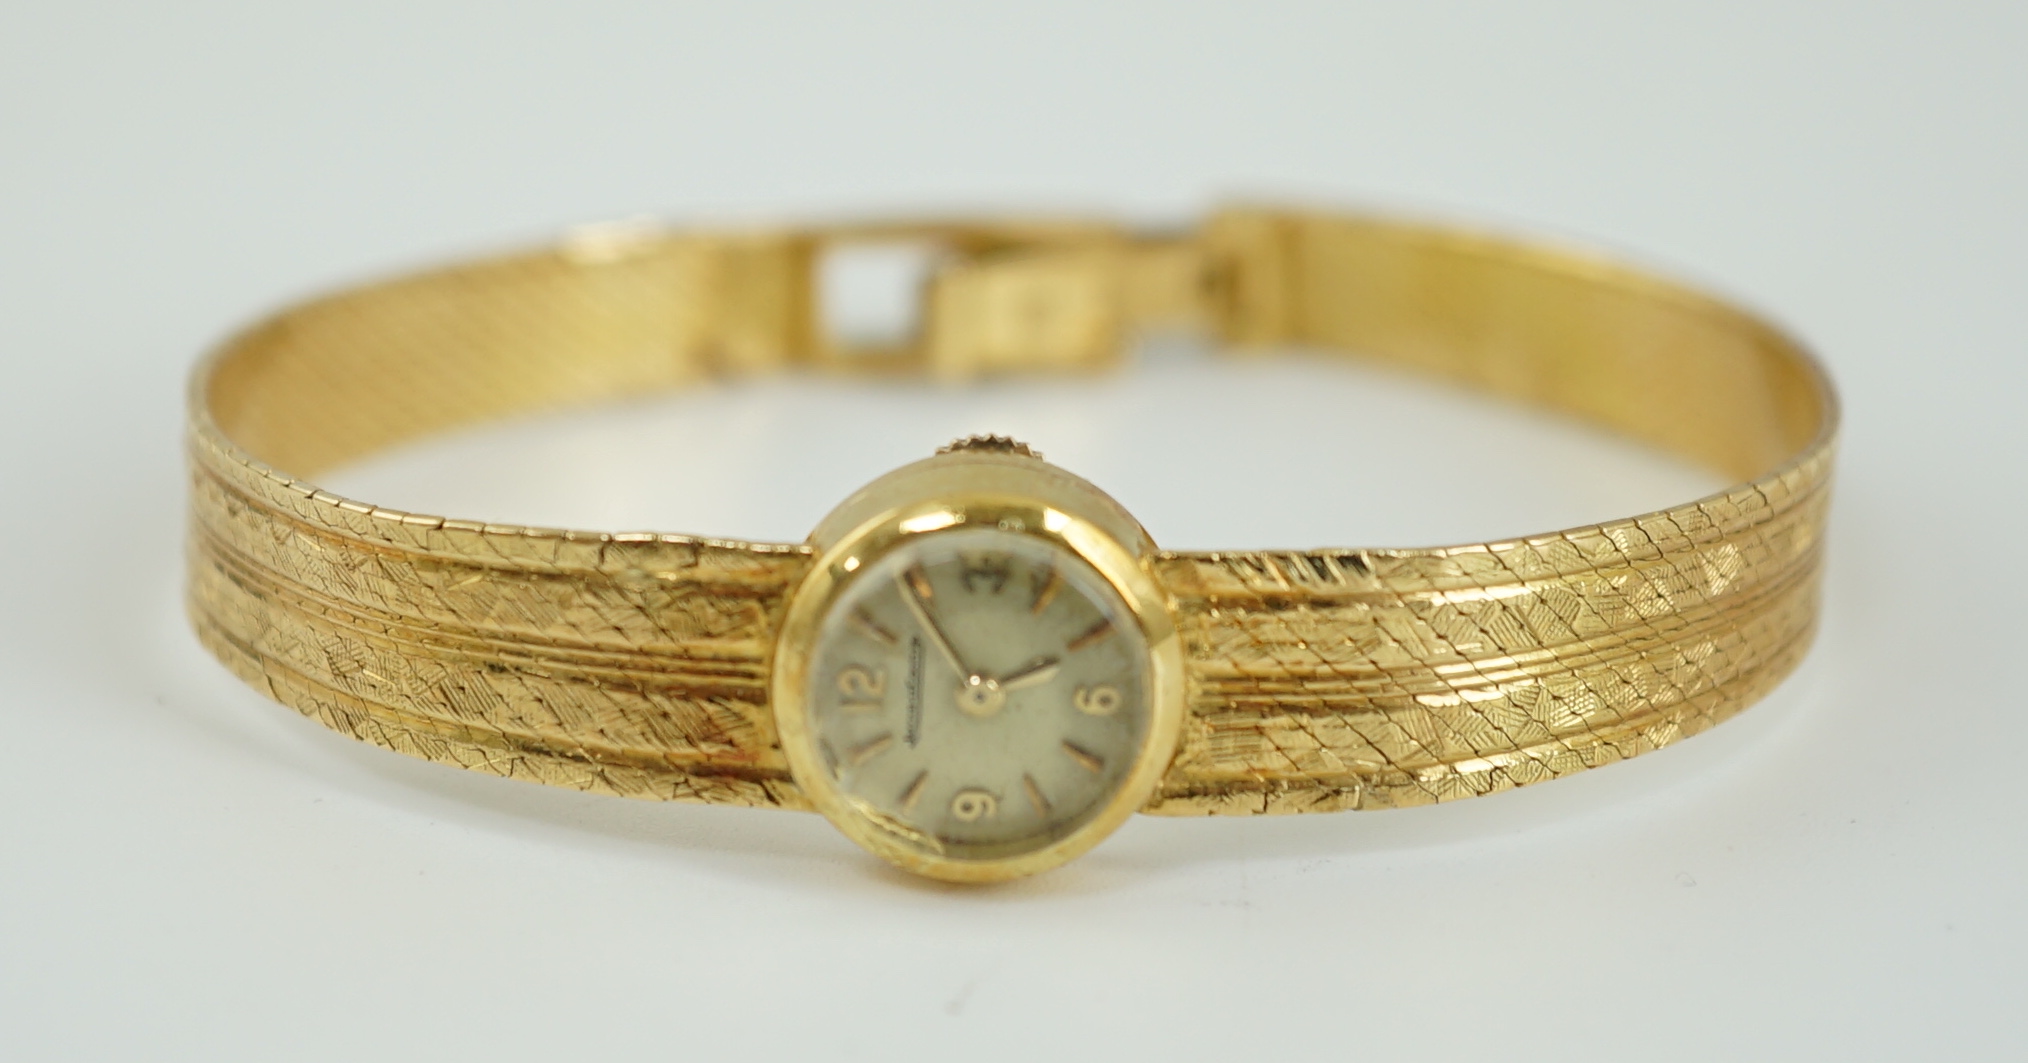 A lady's 18ct gold Jaeger LeCoultre manual wind wrist watch